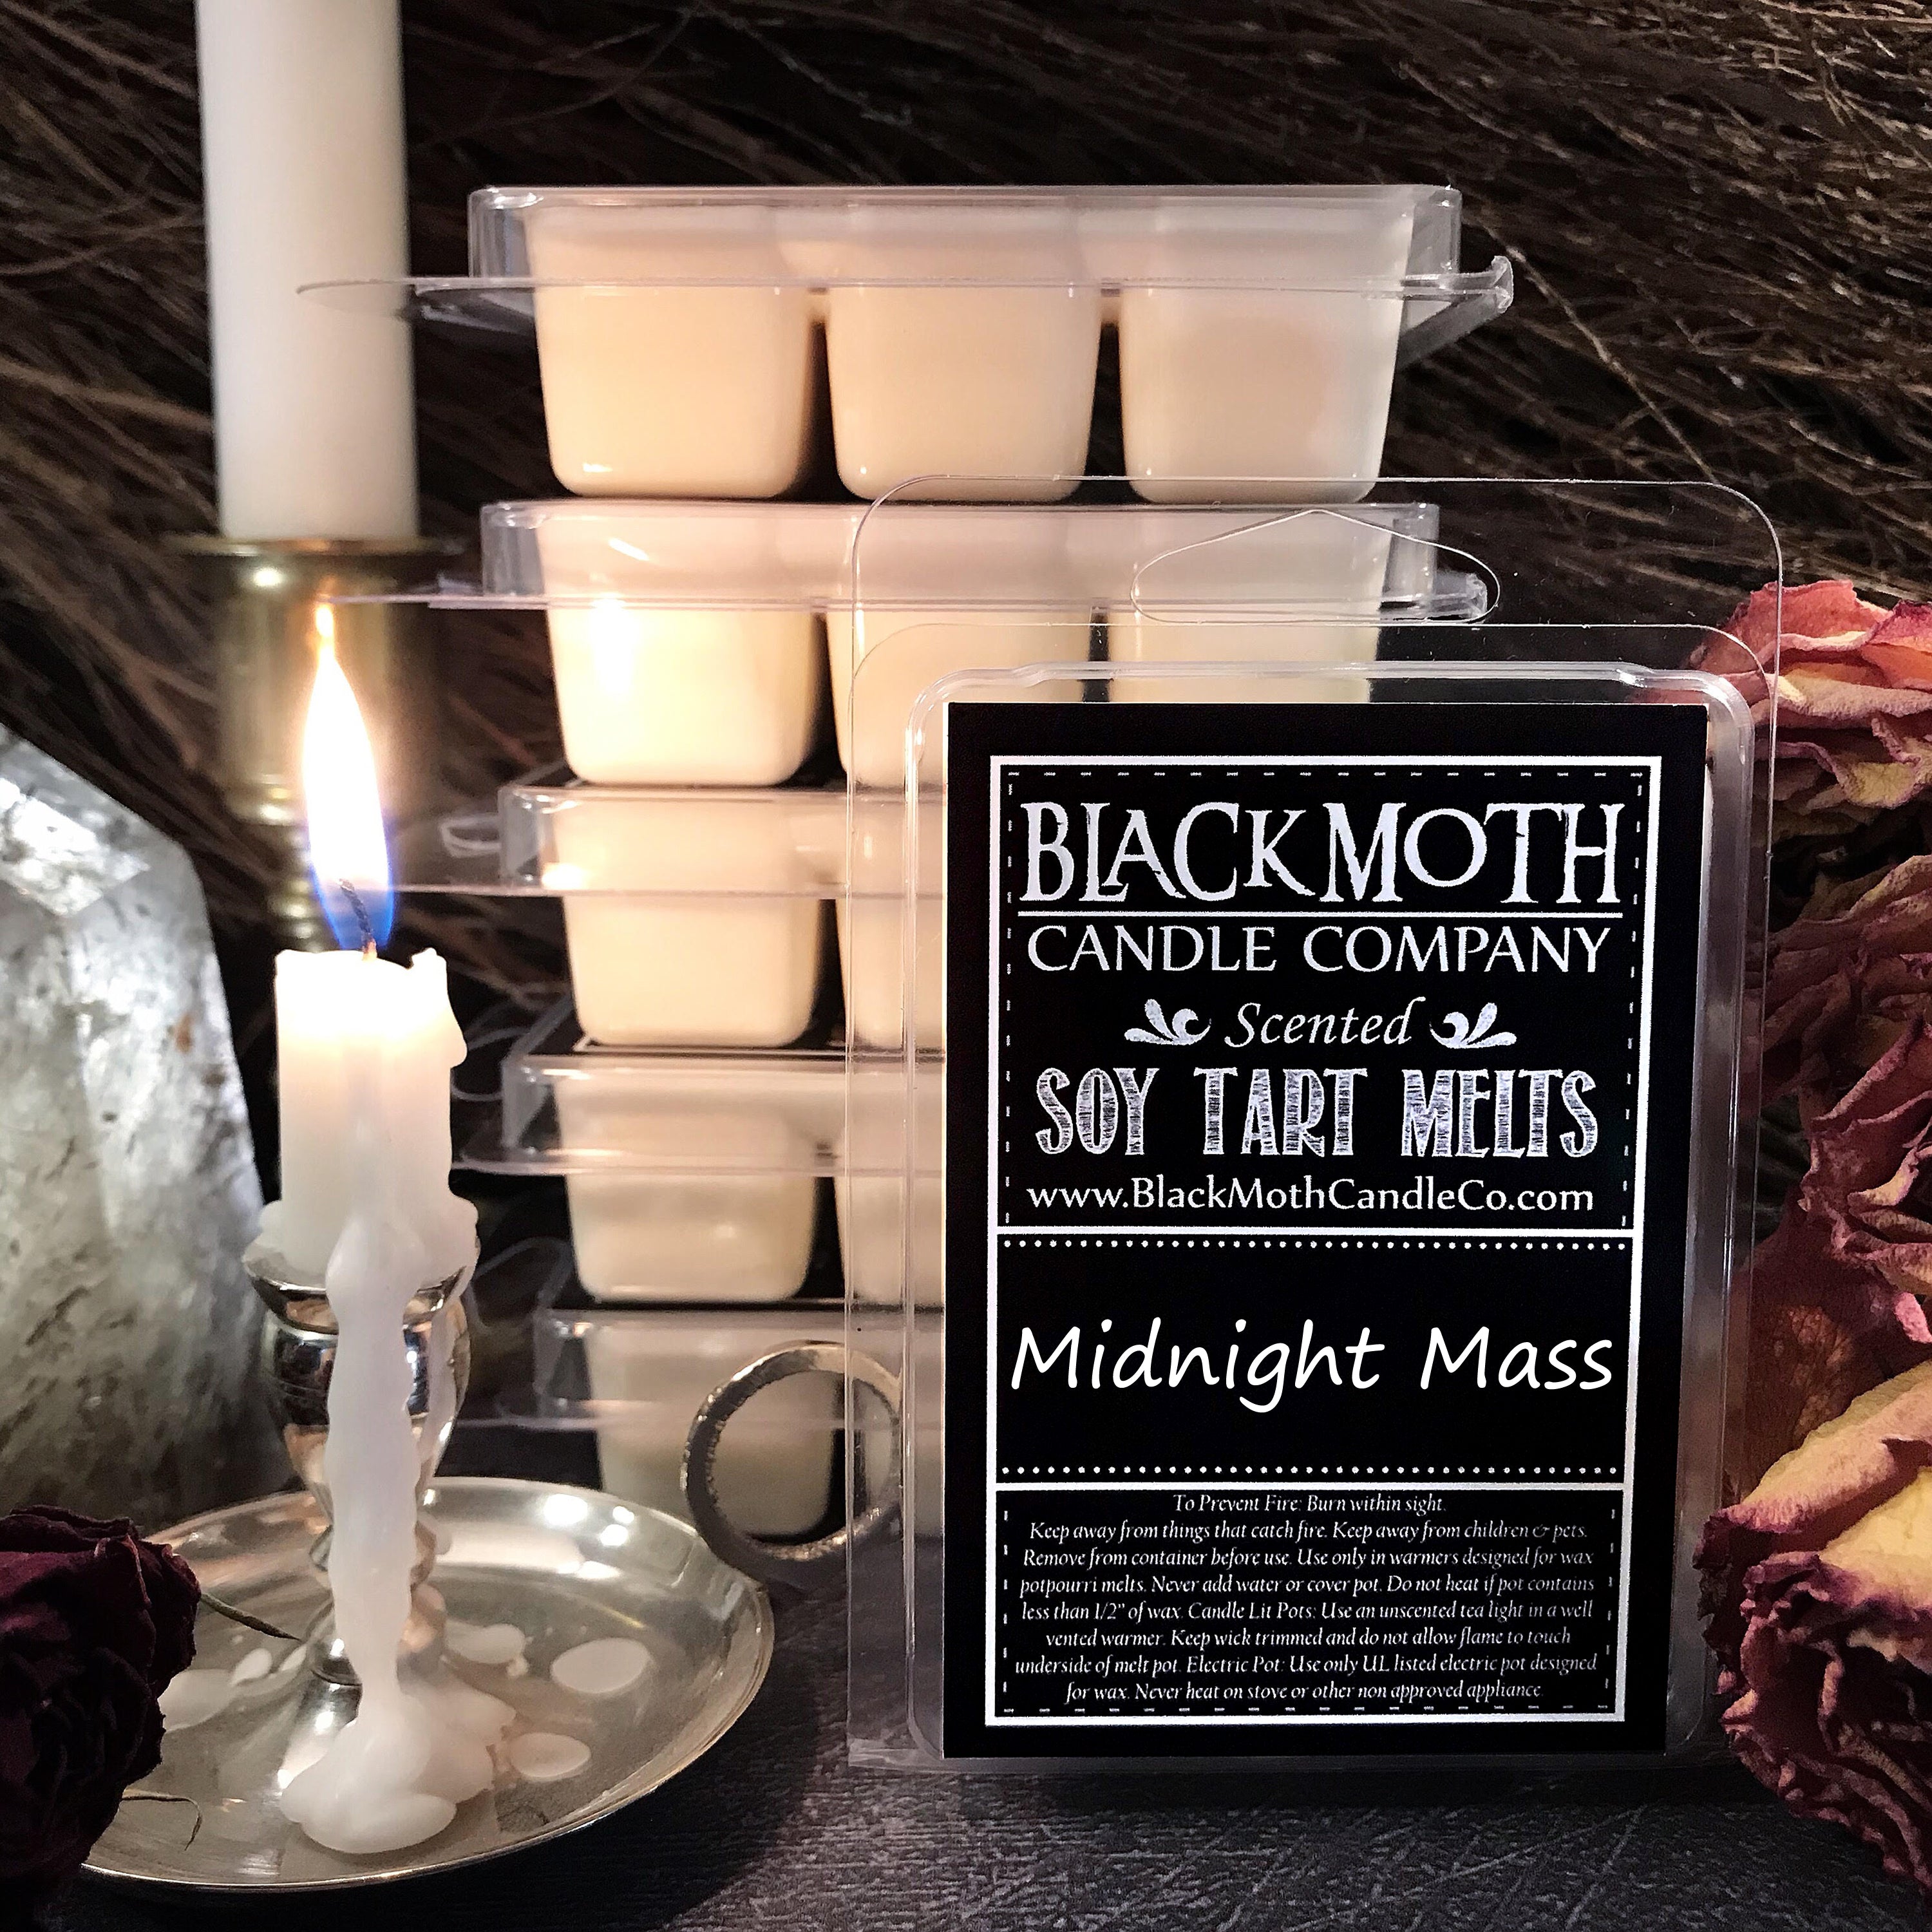 Midnight Mass Scented Soy Wax Melts